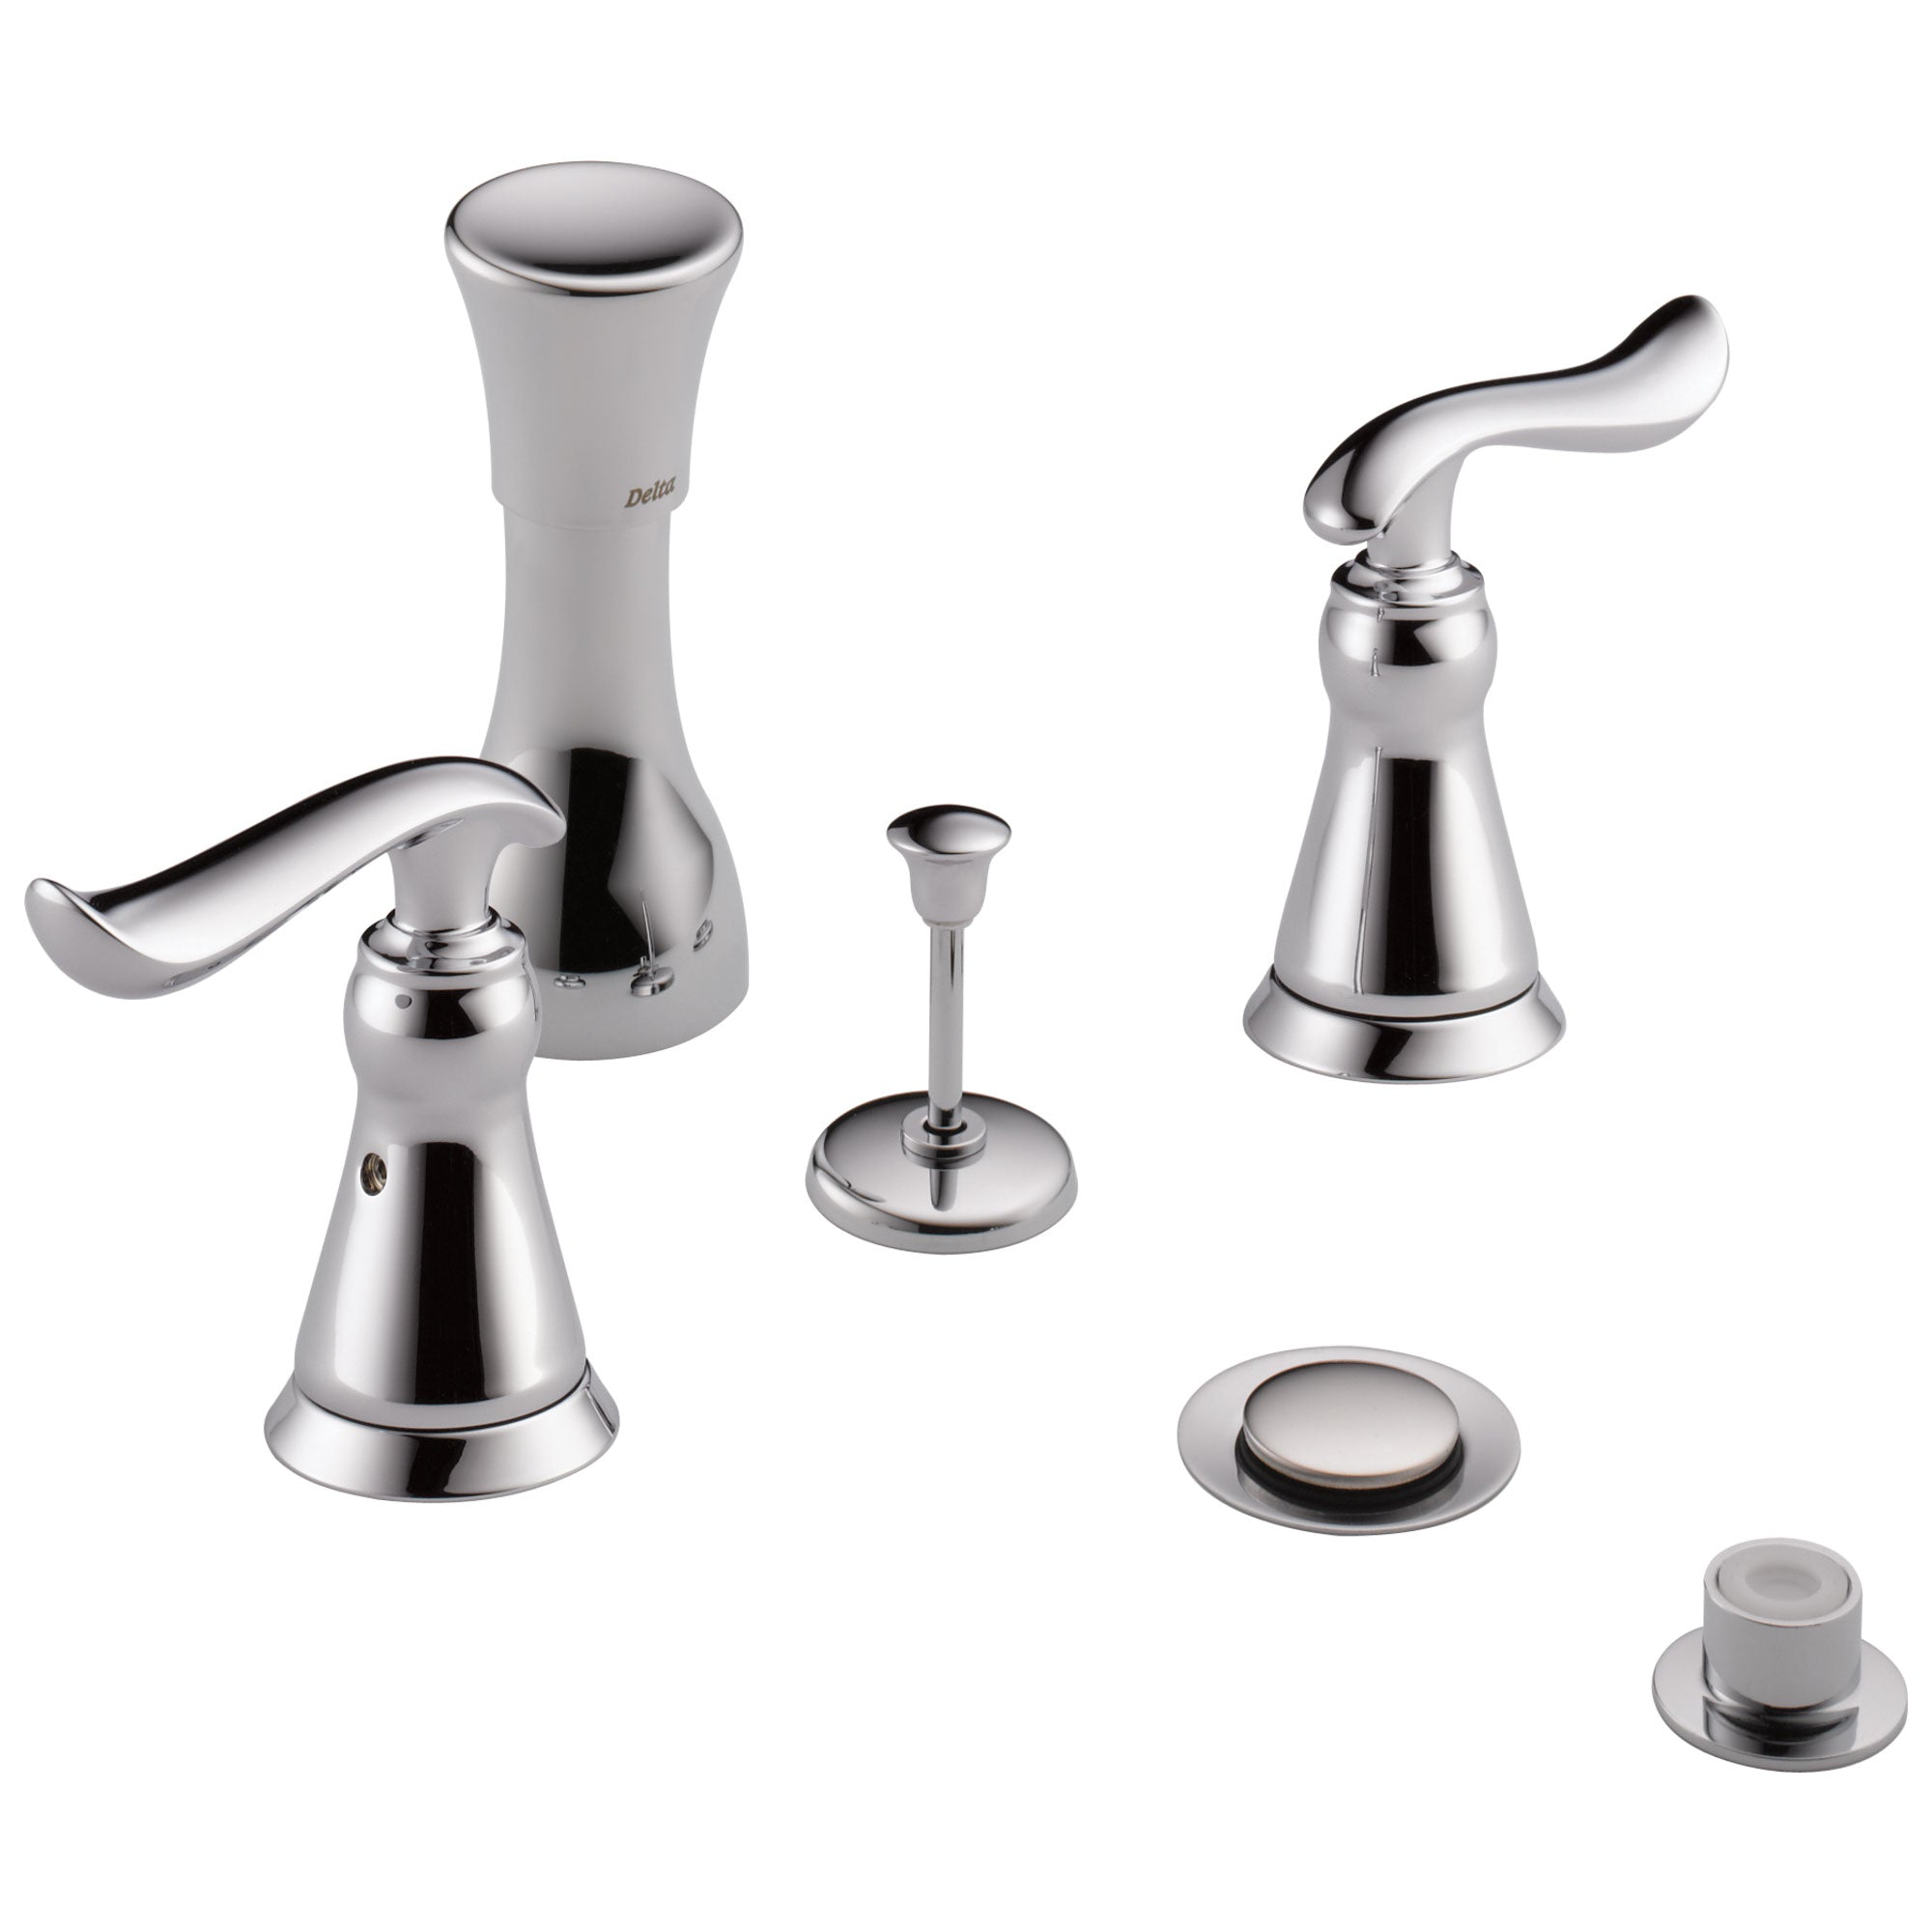 Delta Chrome Finish Linden Collection 4 Hole 6" or 8" Installation Bathroom Bidet Faucet with Metal Pop-up COMPLETE ITEM Includes Two Lever Handles D1752V